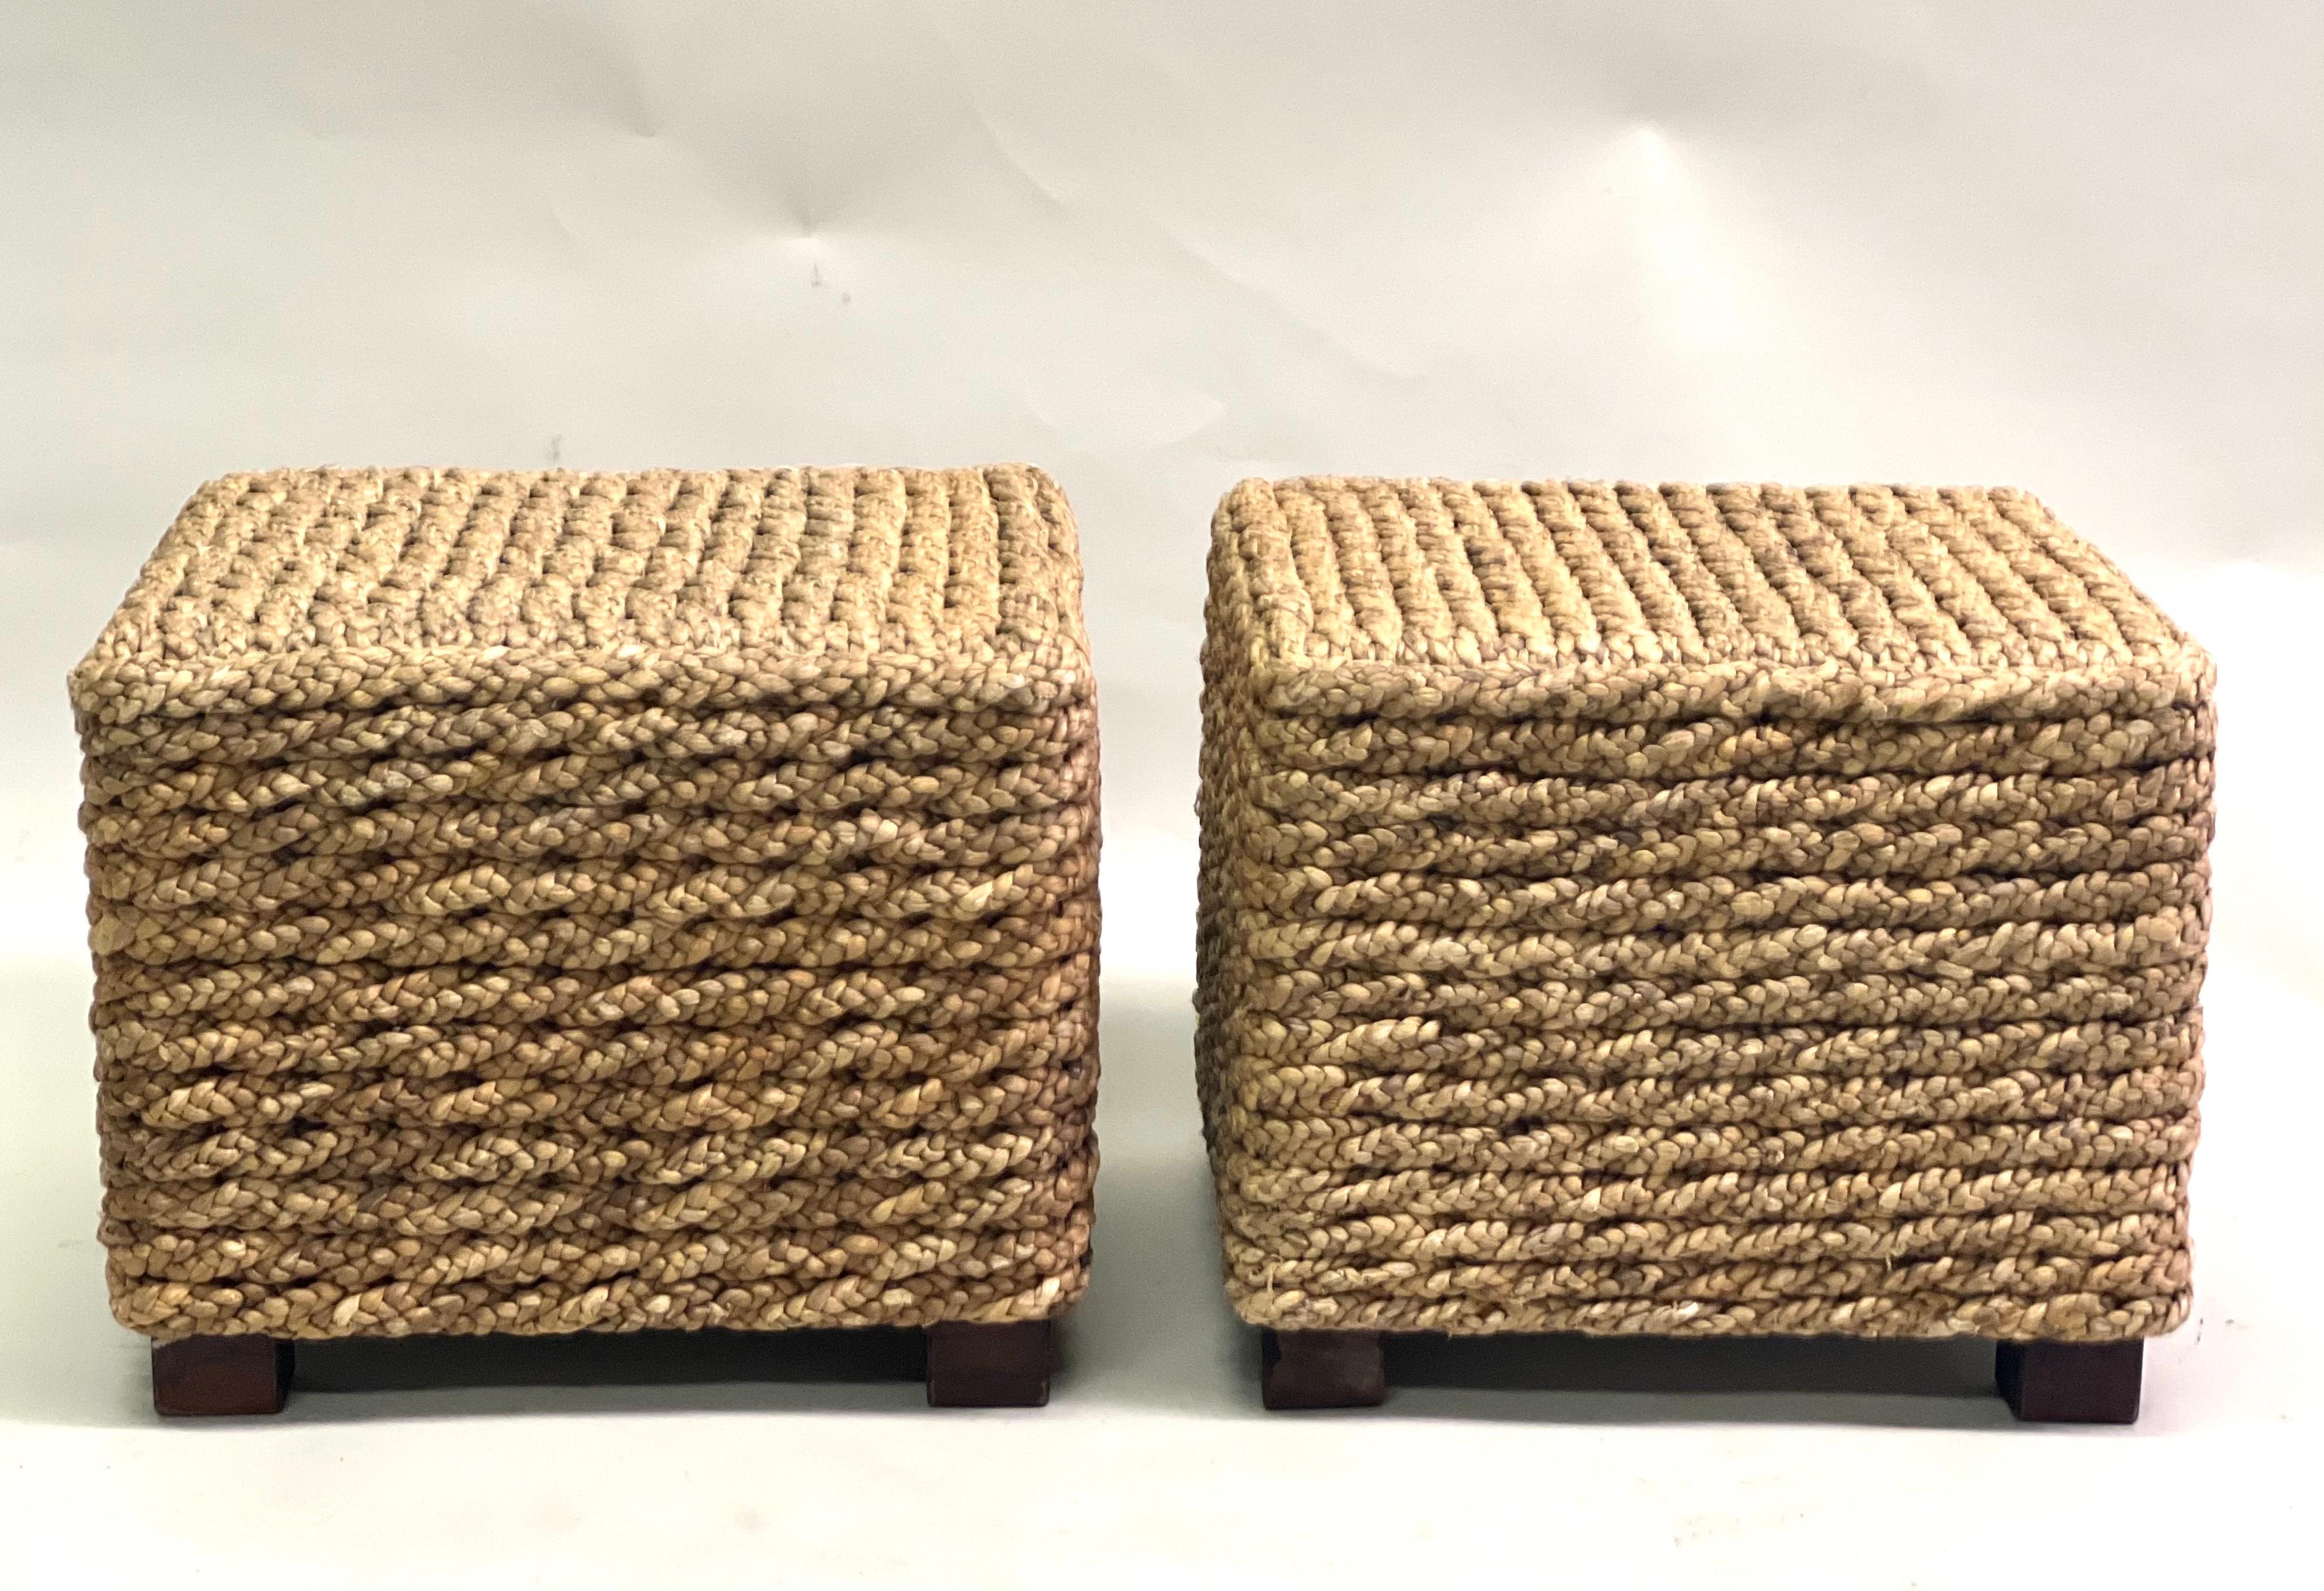 Elegant, Timeless Pair of French Mid-Century Modern Stools, Ottomans or Benches Hand-crafted and hand-knotted in Rope by Adrien Audoux and Frida Minet, France, circa 1960-1970. These modern craftsman pieces are carefully designed and constructed